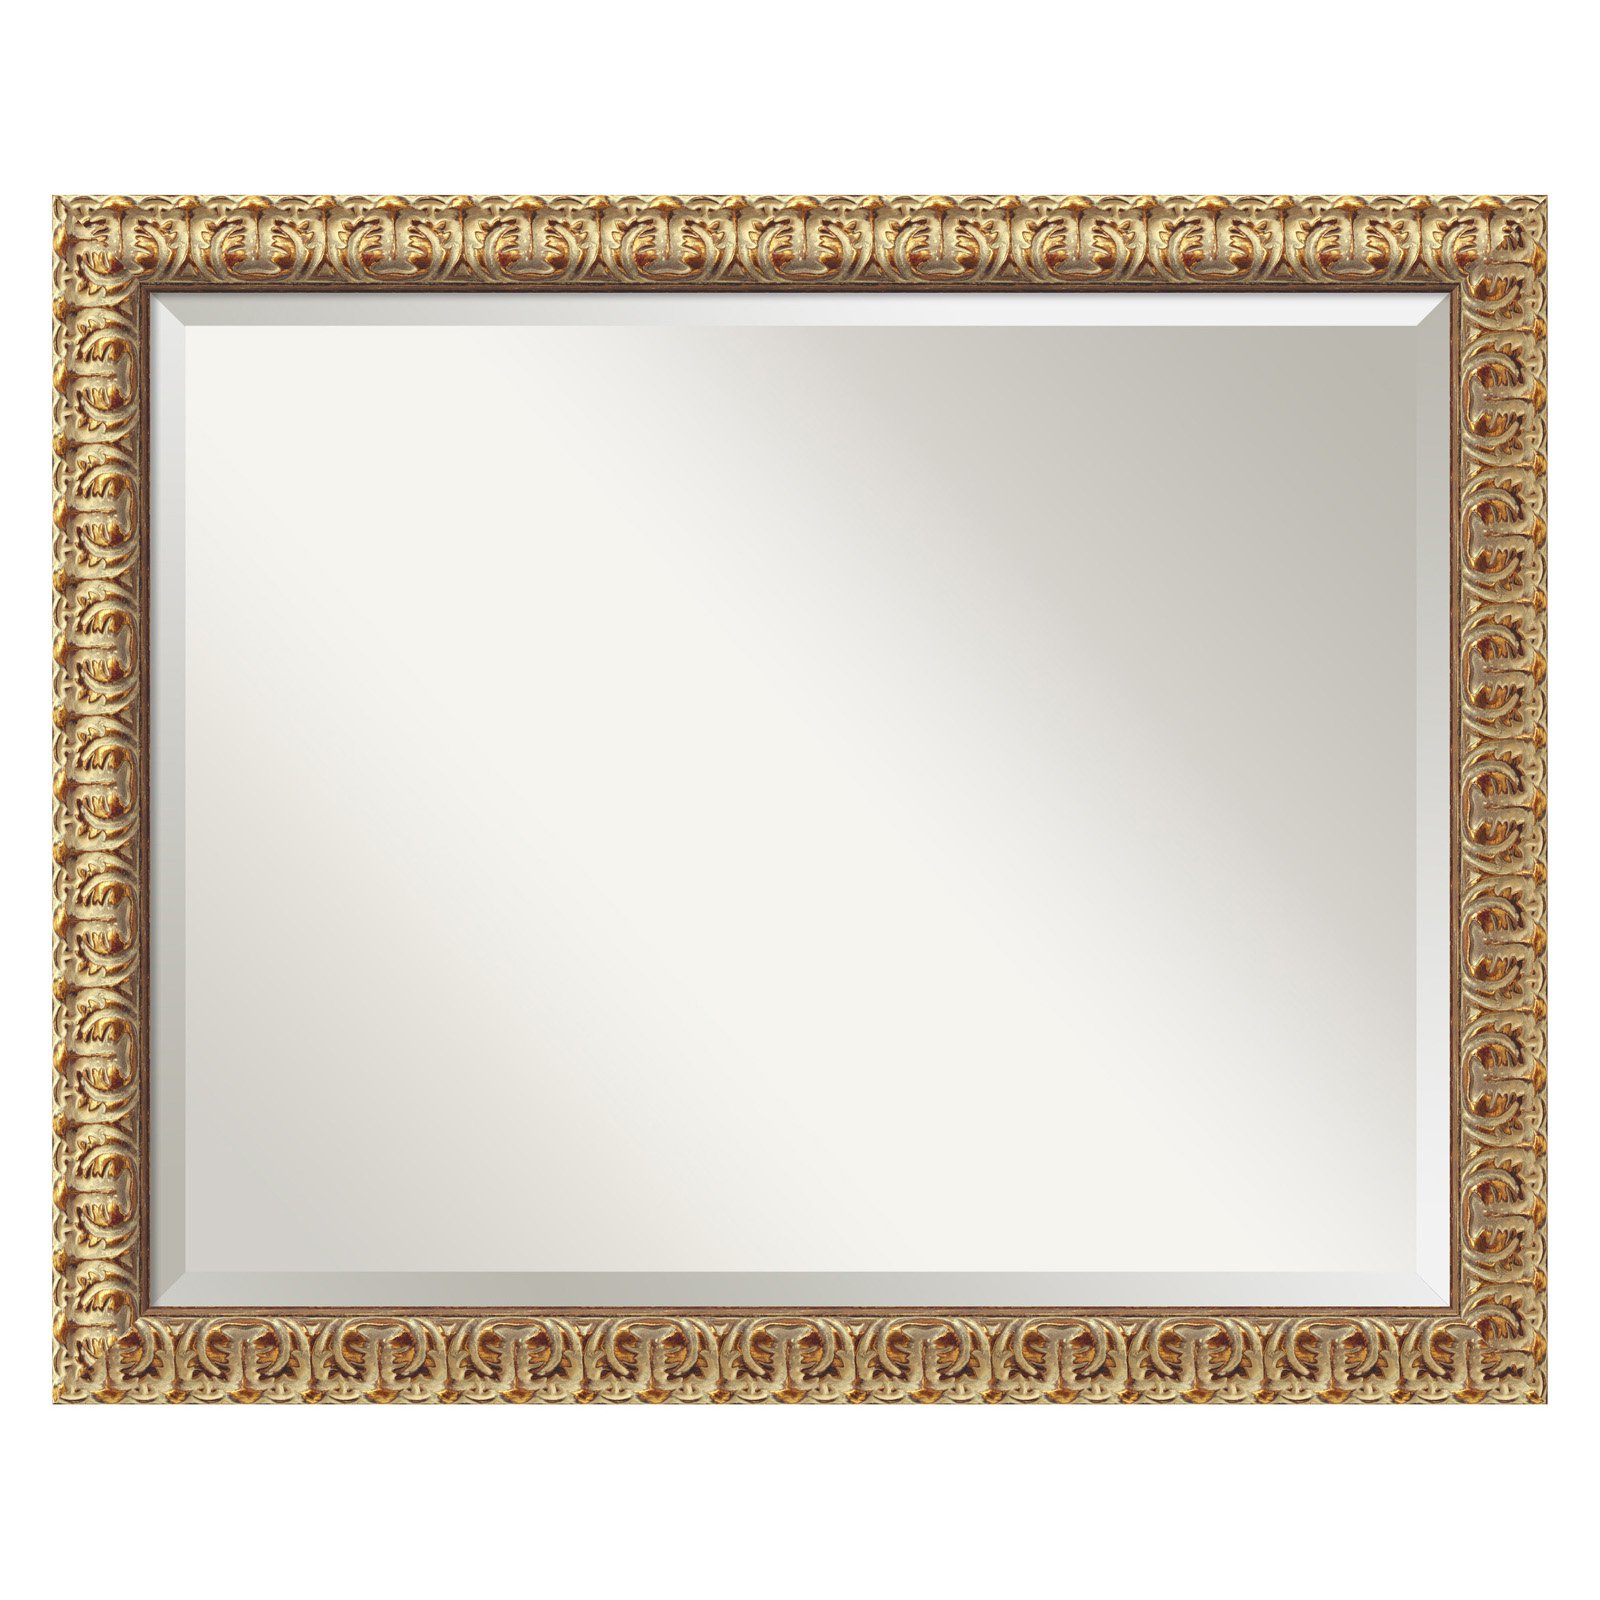 Florentine Gold Wall Mirror - 31.5W x 25.5H in. - image 1 of 5